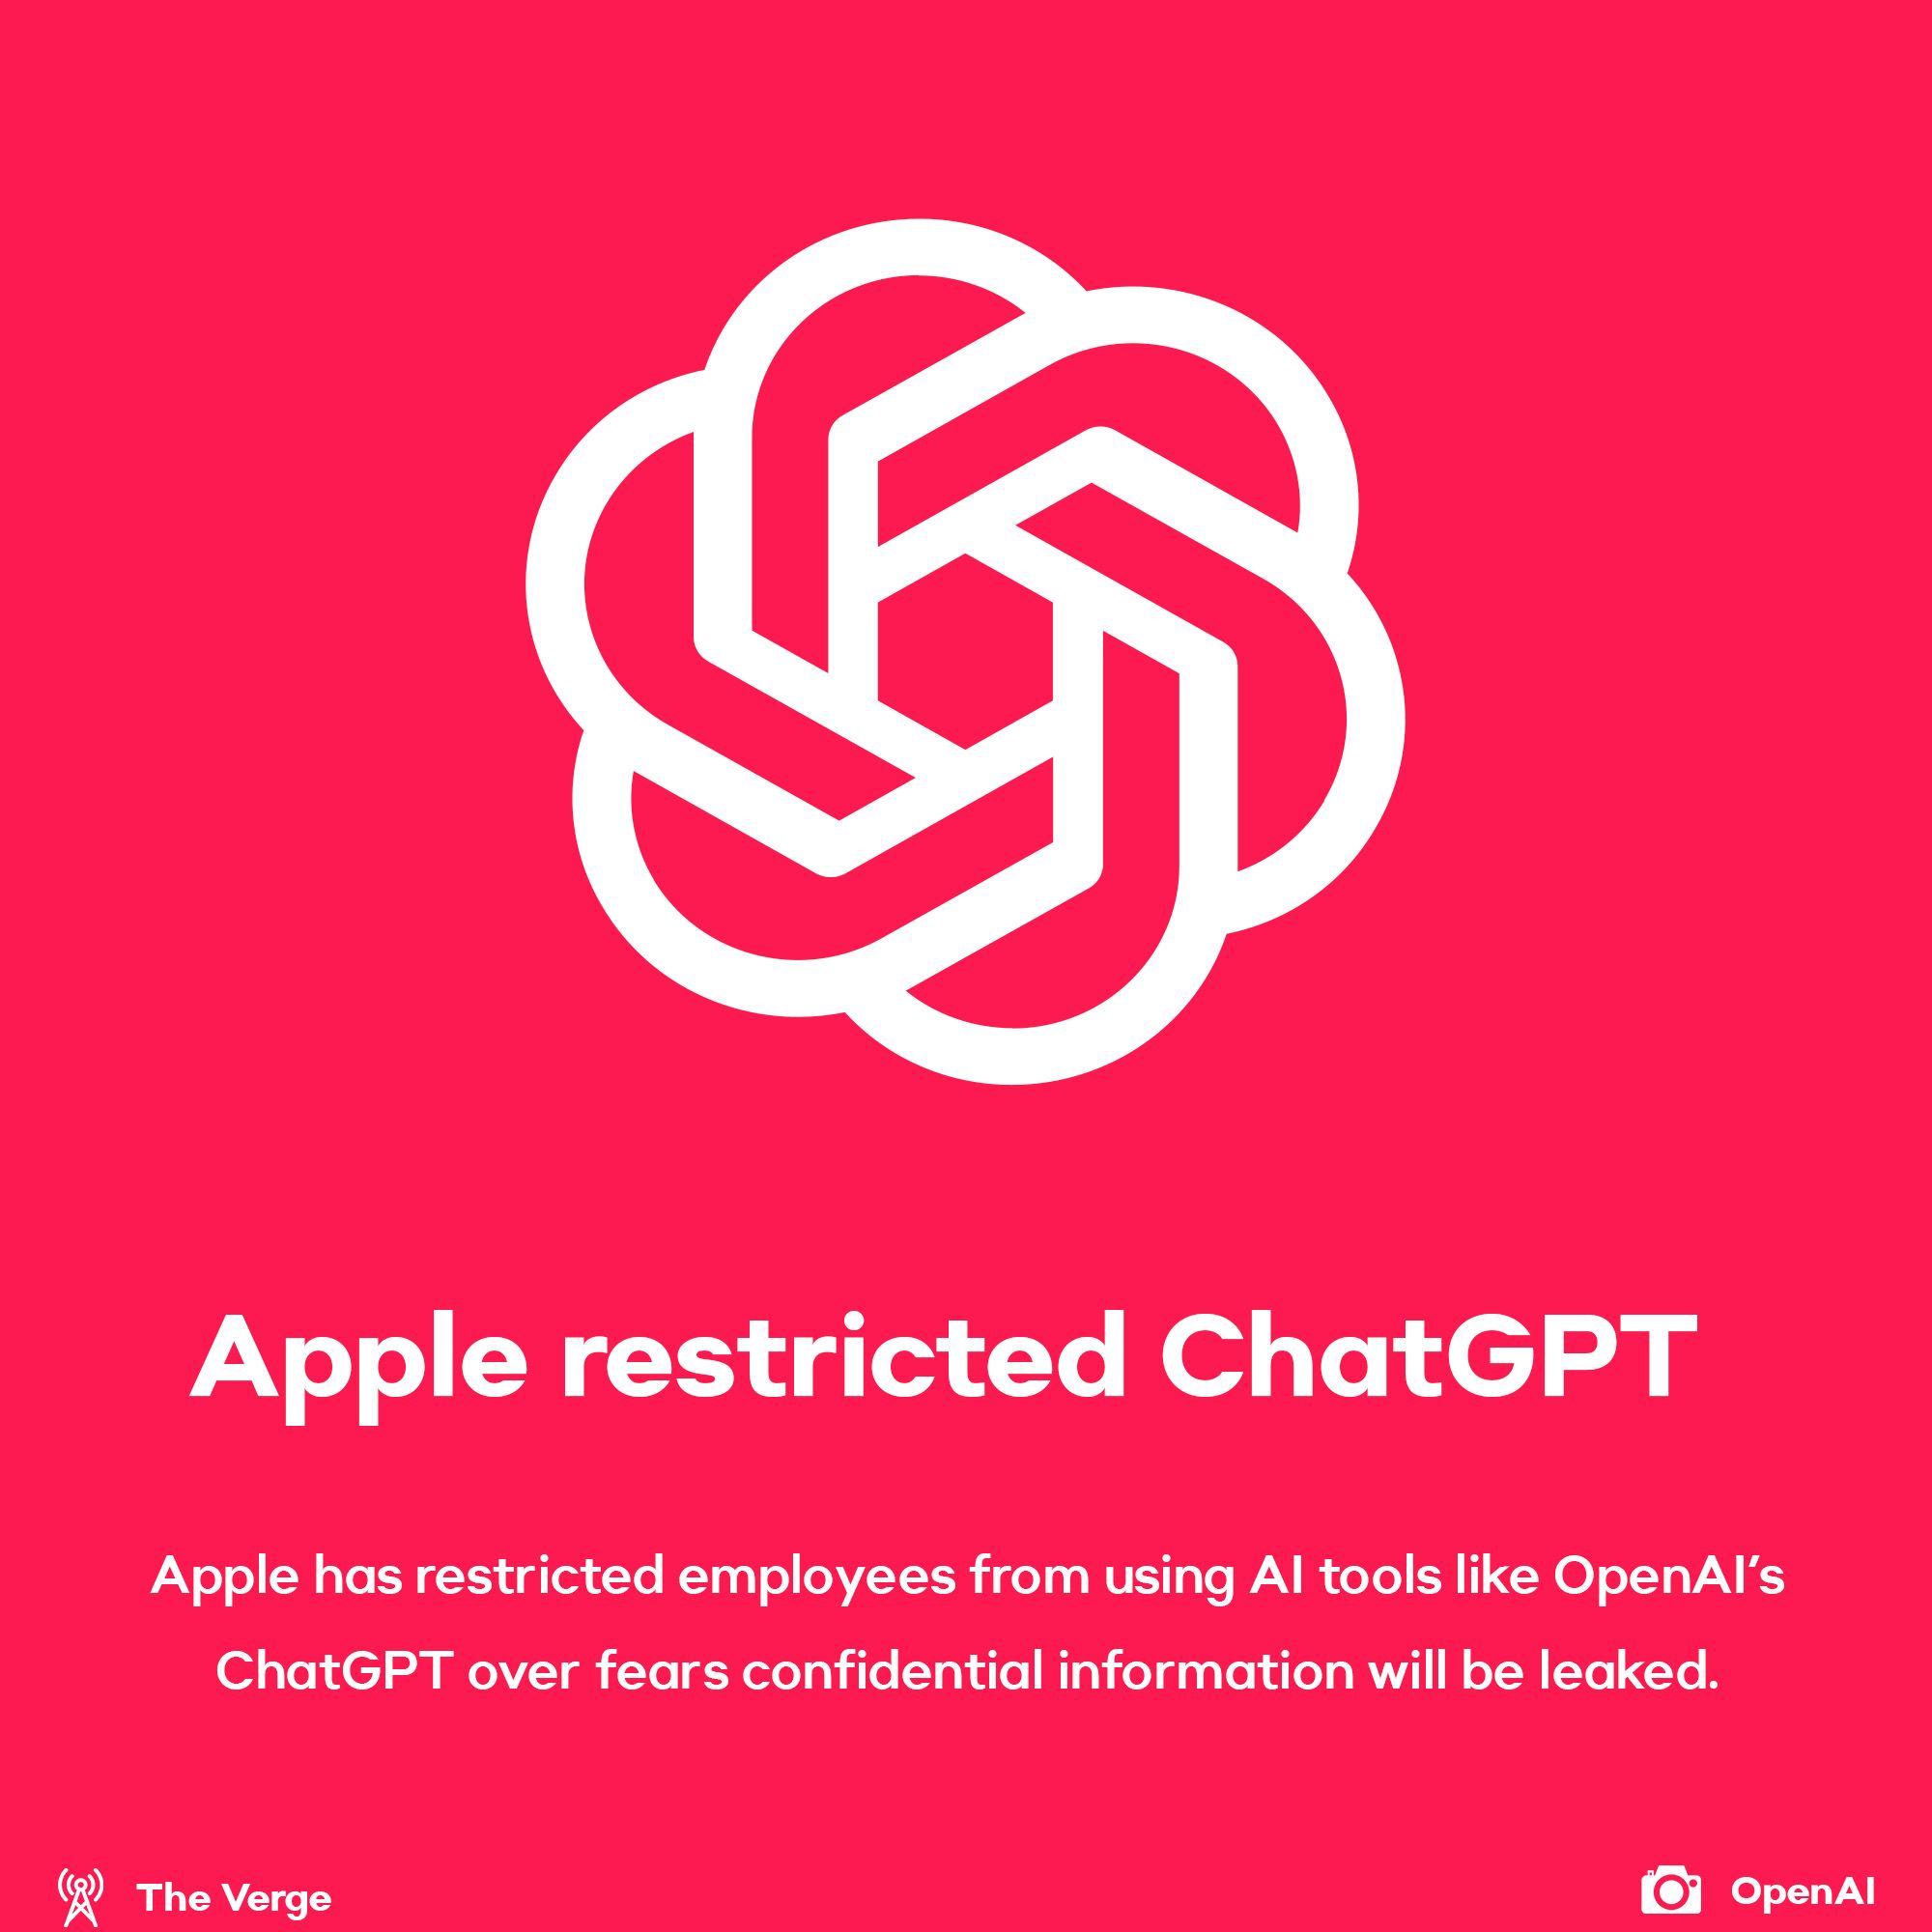 Apple restricted ChatGPT